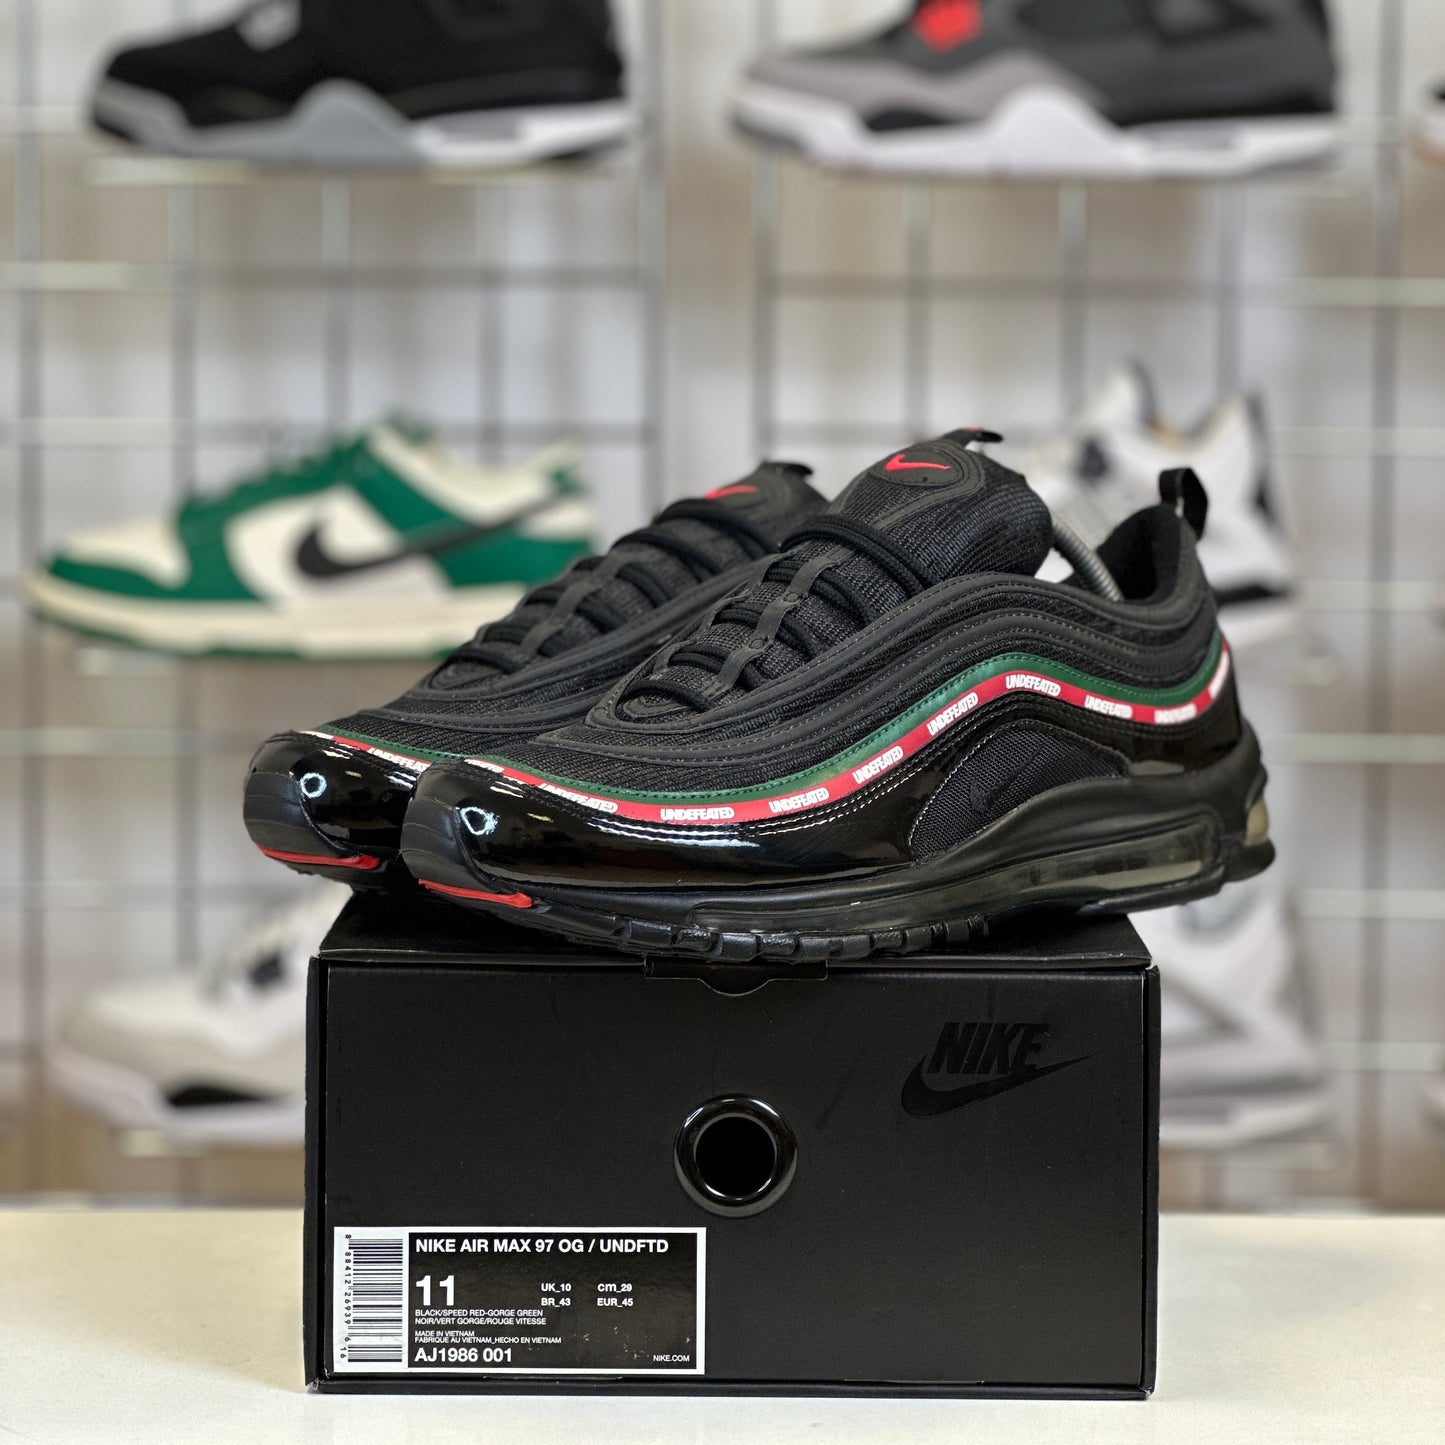 Nike Air Max 97 'Undefeated Black' UK10